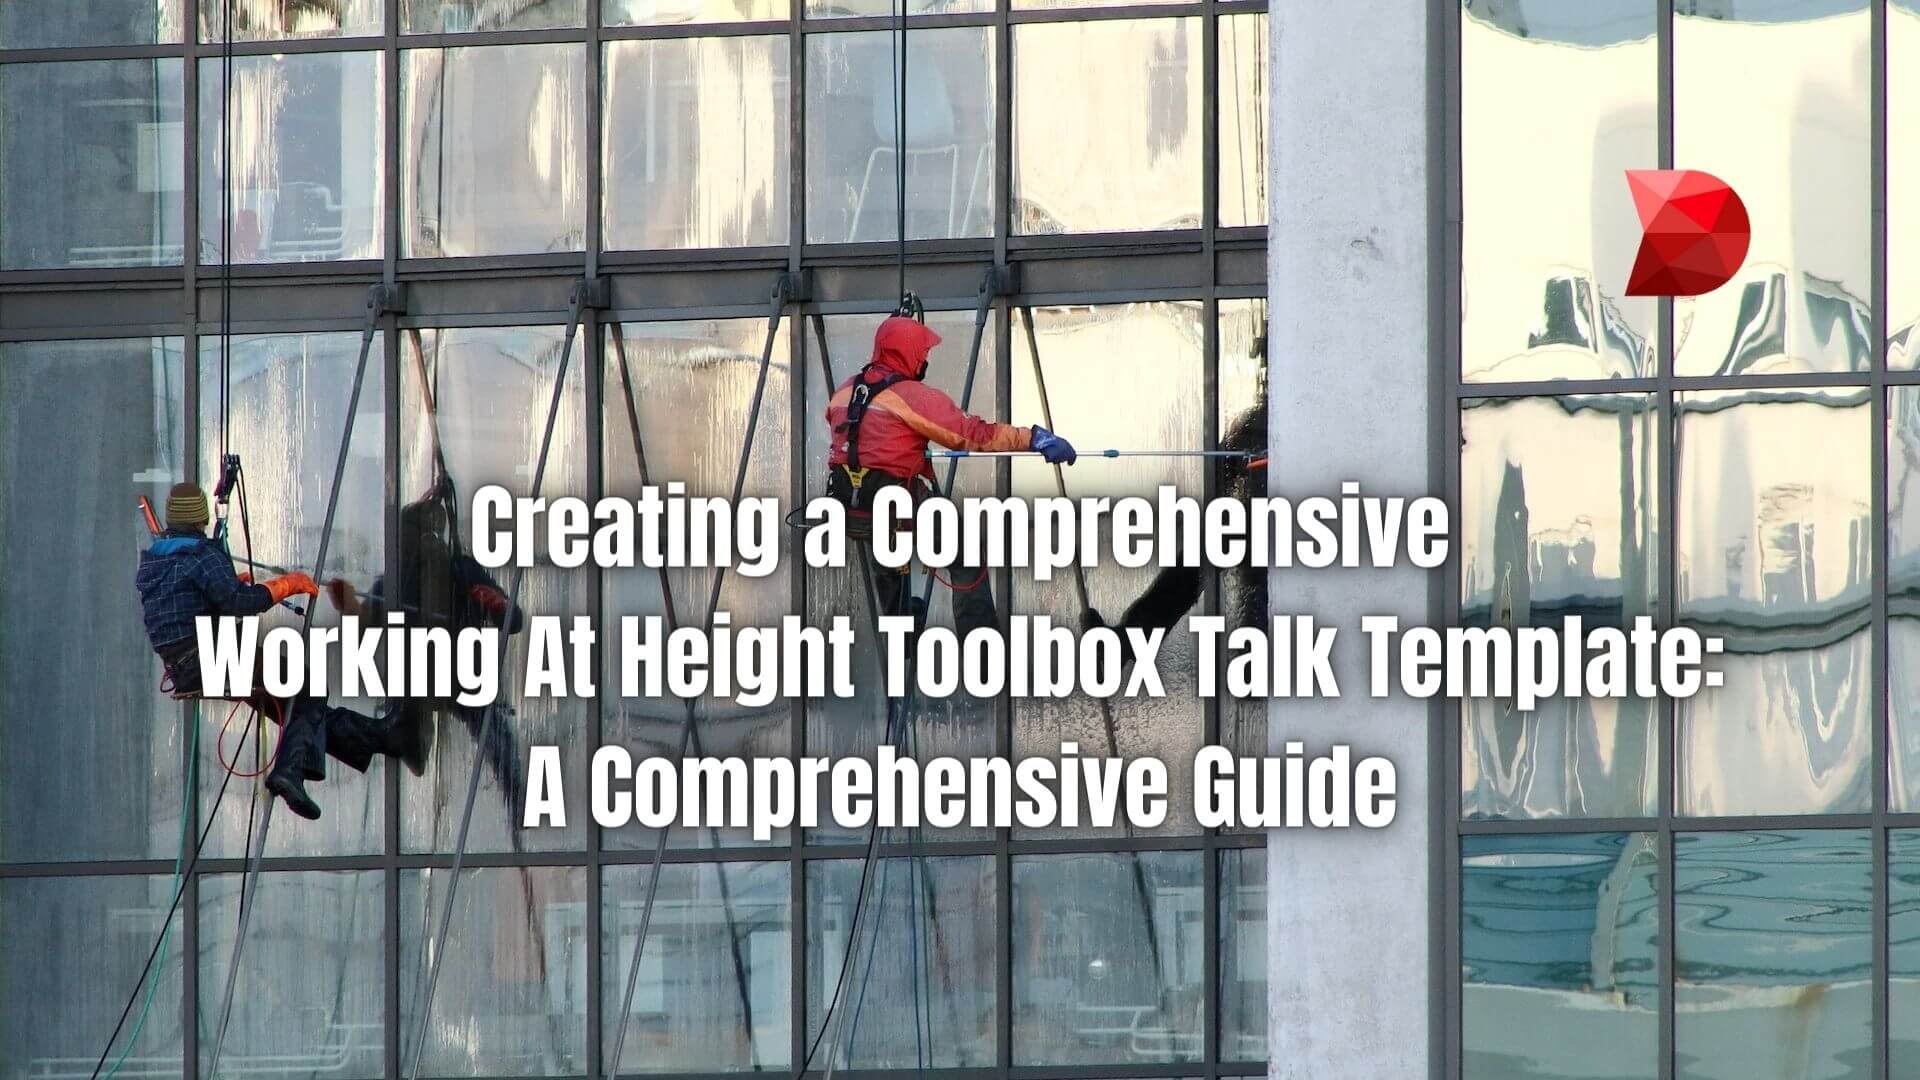 Working at Height Toolbox Talk template is used to facilitate crucial safety conversations before any high-elevation work starts. Read more!